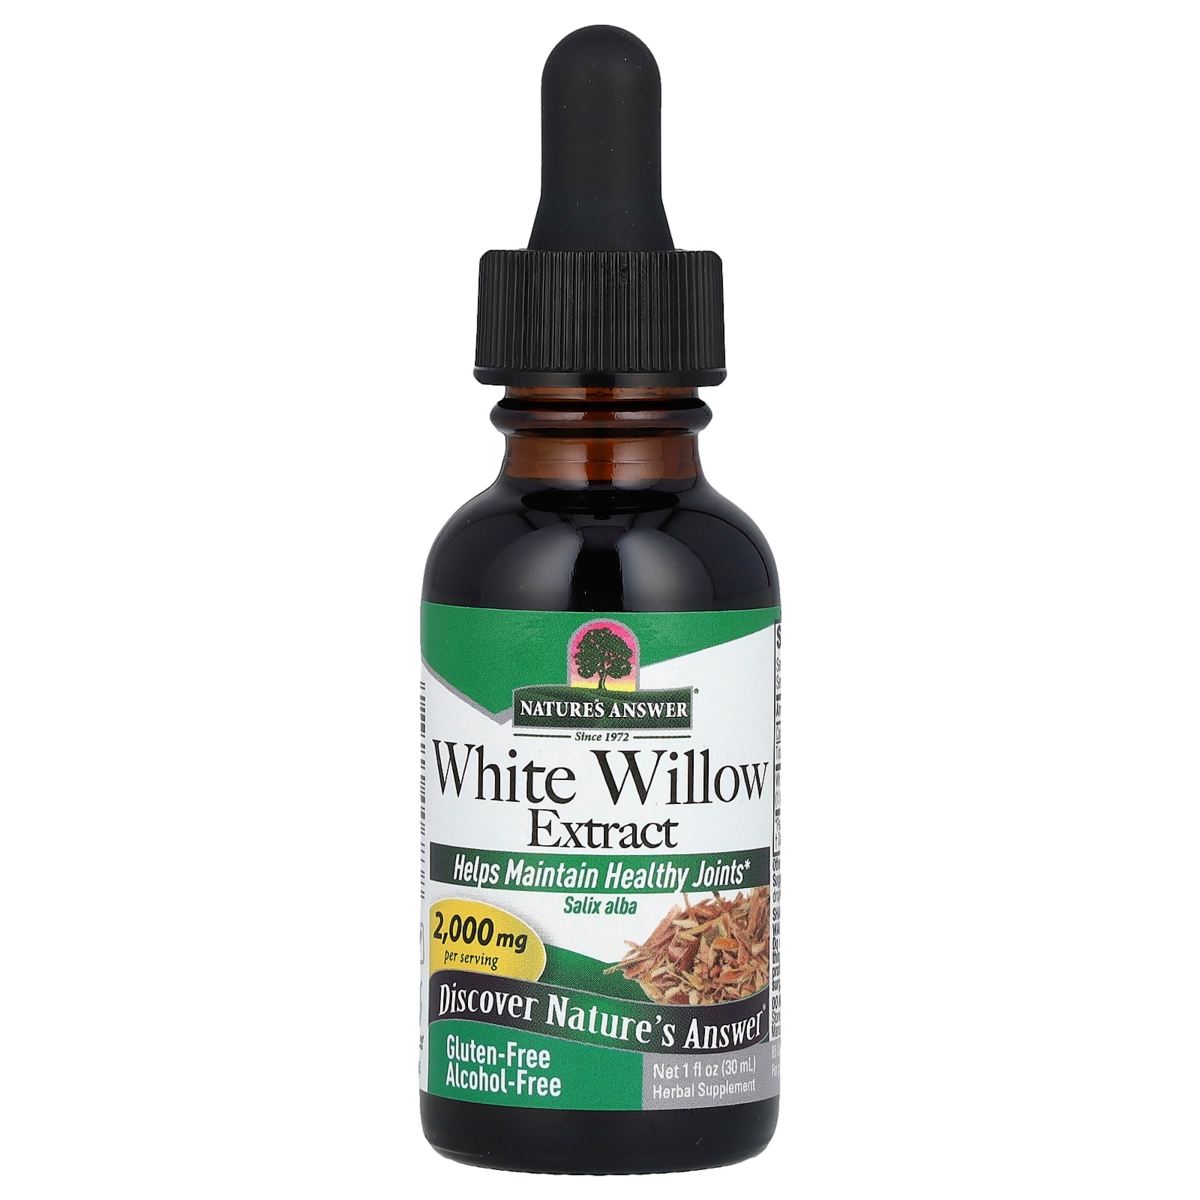 White Willow Extract Alcohol-Free 2 000 mg - 1 fl oz (30 ml) - Assorted Pre-Pack